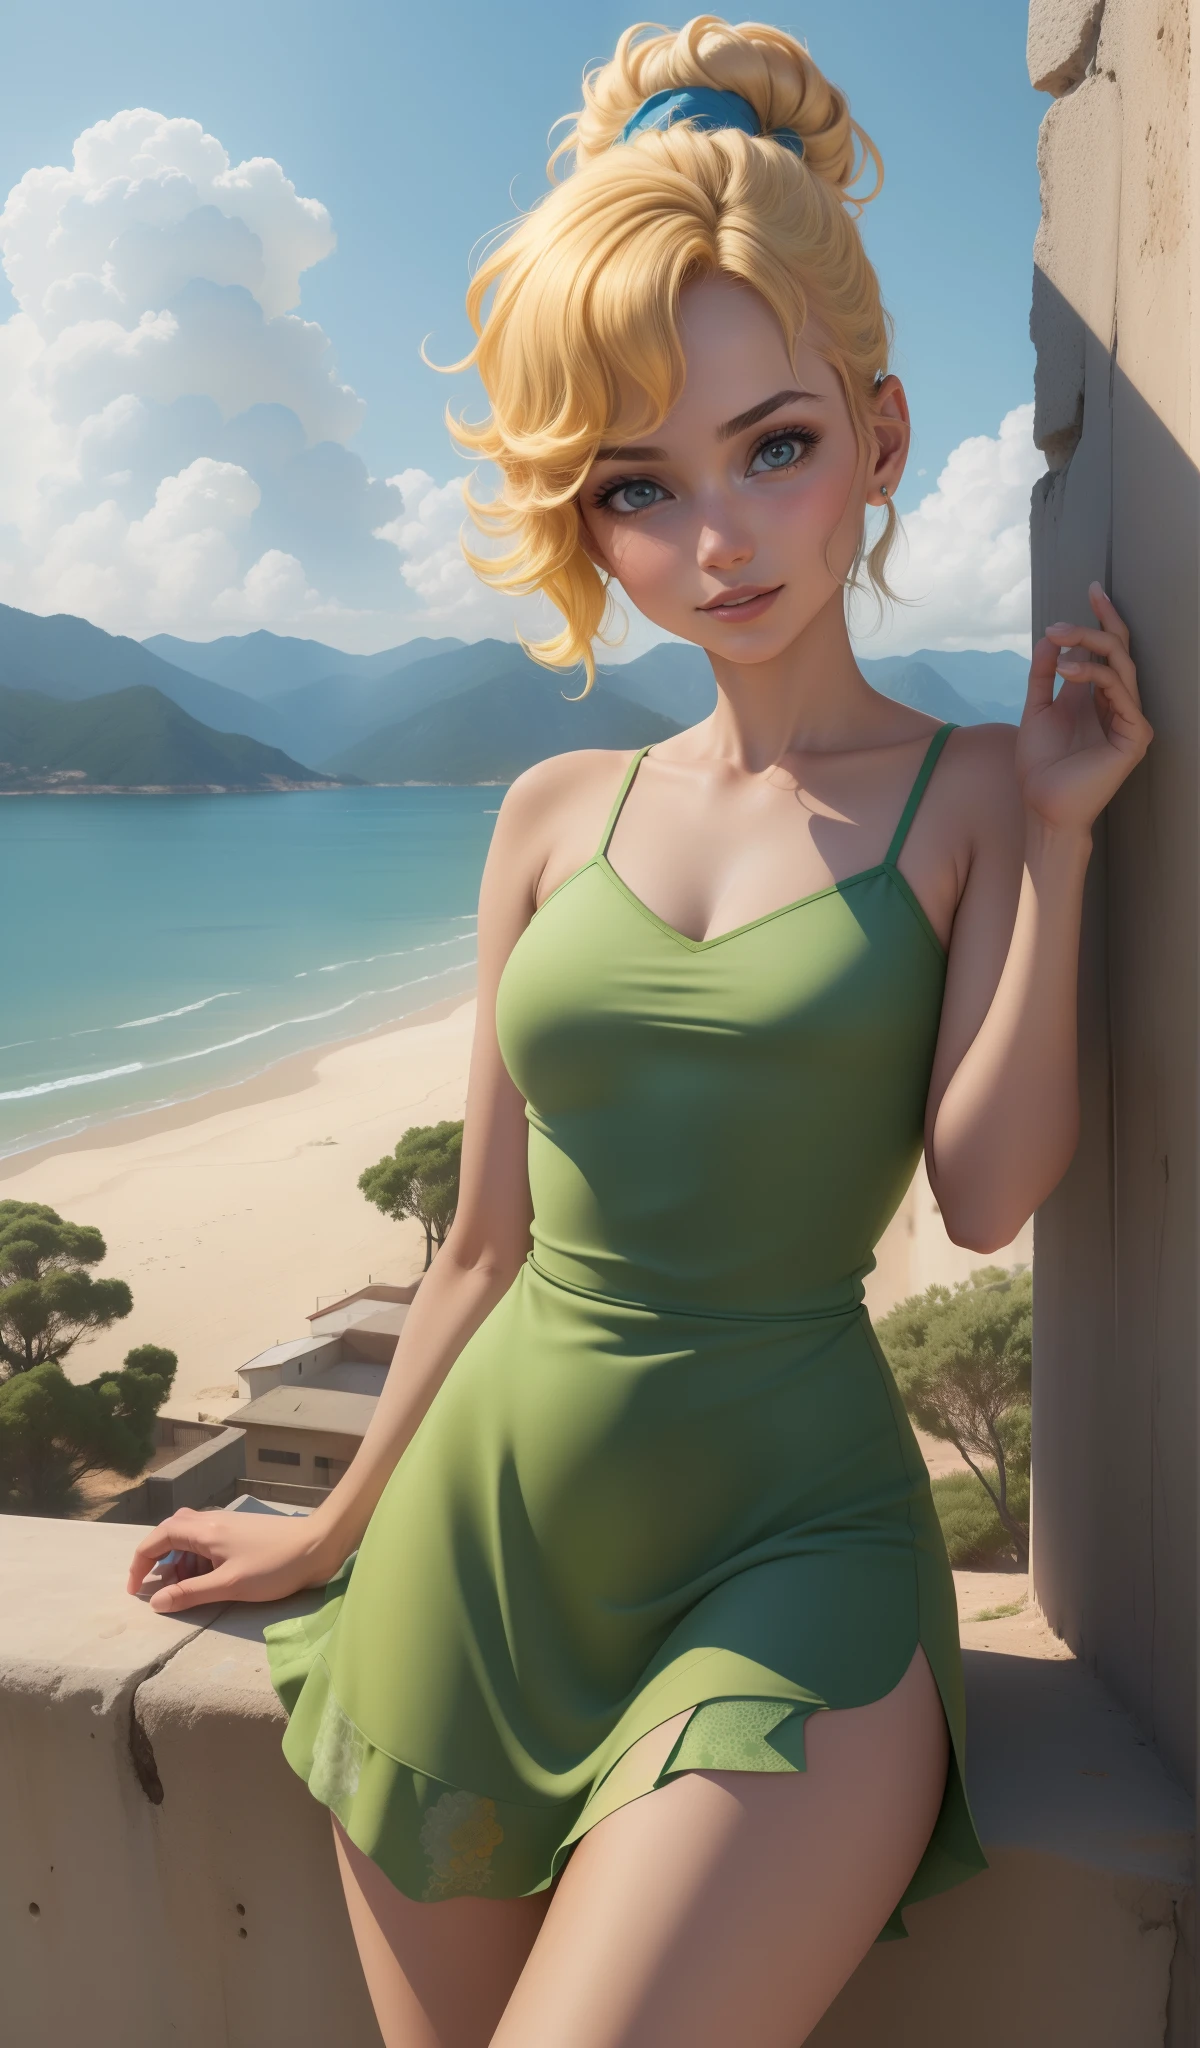 (TinkerWaifu:1), face perfect, sorrido, fluffly, cute pose, Looking at Viewer, single hair bun, short hair, (green strapless dress:1), (fairy wings naughty), sitting down, From  above, (Realistic:1 ,2), (真实感), (master part: 1,2), (best quality), (ultra detaild), (8k, 4K, Complex), (full body shot shot: 1), (Foto Cowboy: 1.2), (85 millimeters),light particles, The lighting, (highy detailed:1.2),(face detailed:1.2), (gradients), SFW, fullcolor,(detailedeyes:1.2), (detailed landscape, inside a glass bottle:1,2),(detailed backgrounds),detailed landscape, (Dynamic angle:1,2), (dynamic pose:1,2), (rule of third_compositing:1,3), (action line:1 ,2), A Long Shot, Day Light, floor,